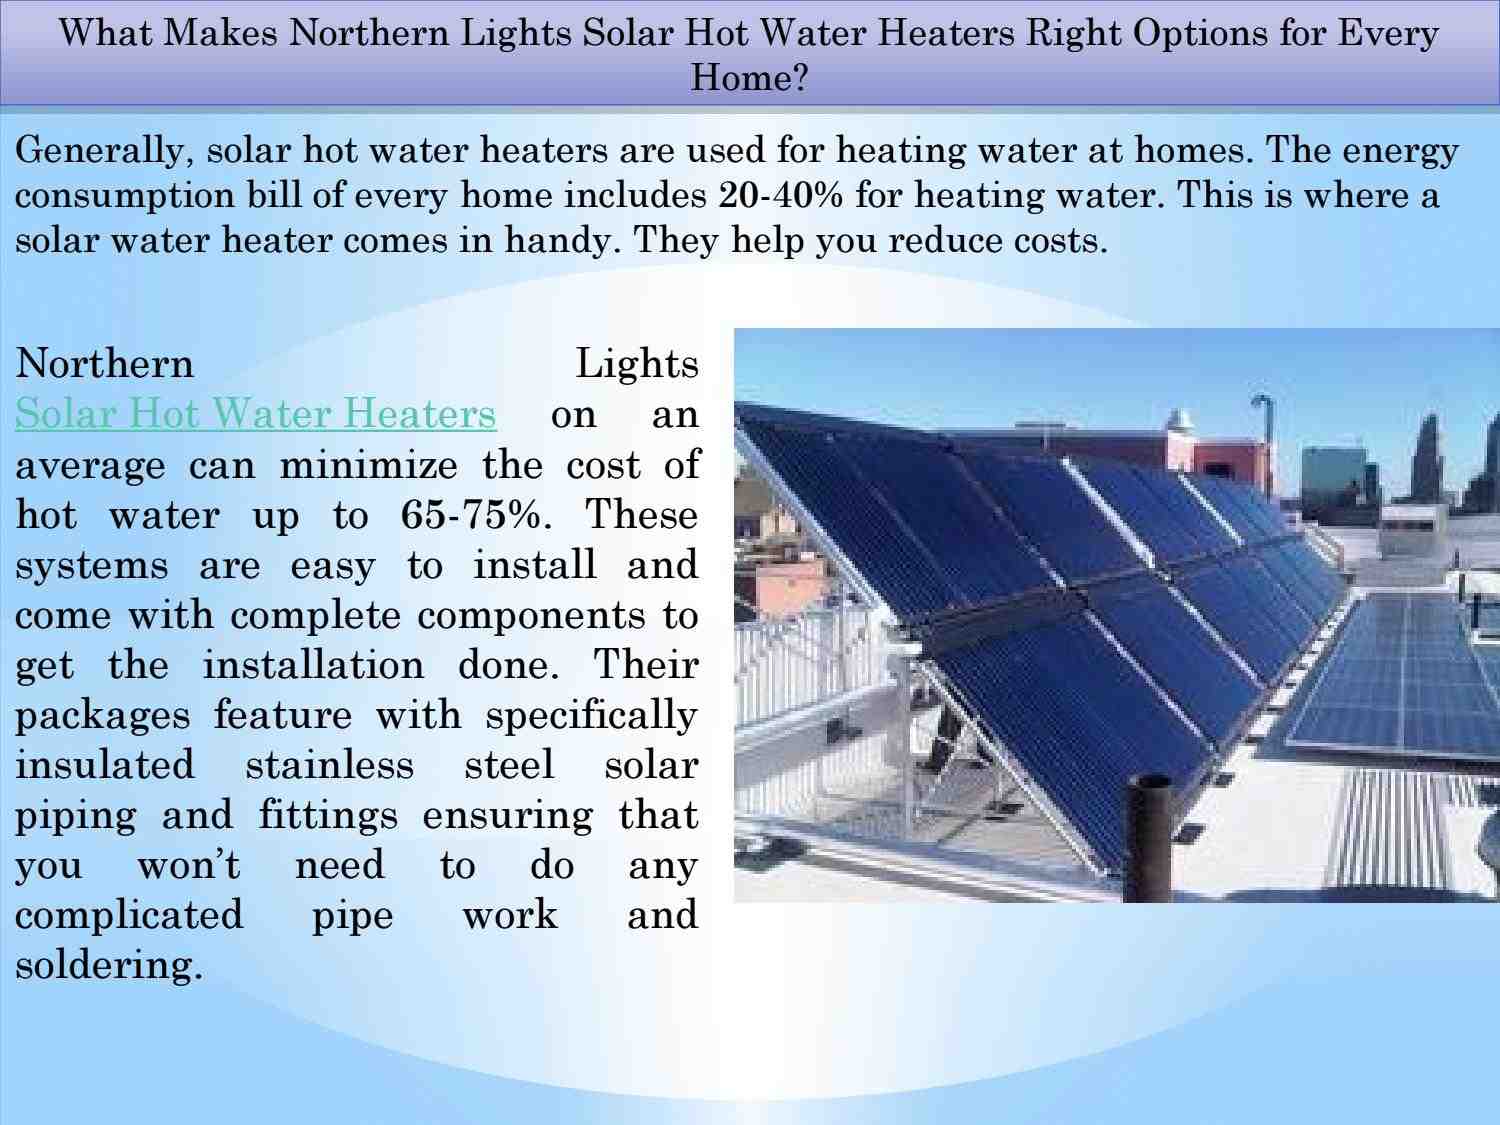 How much does it cost to install a solar hot water heater?